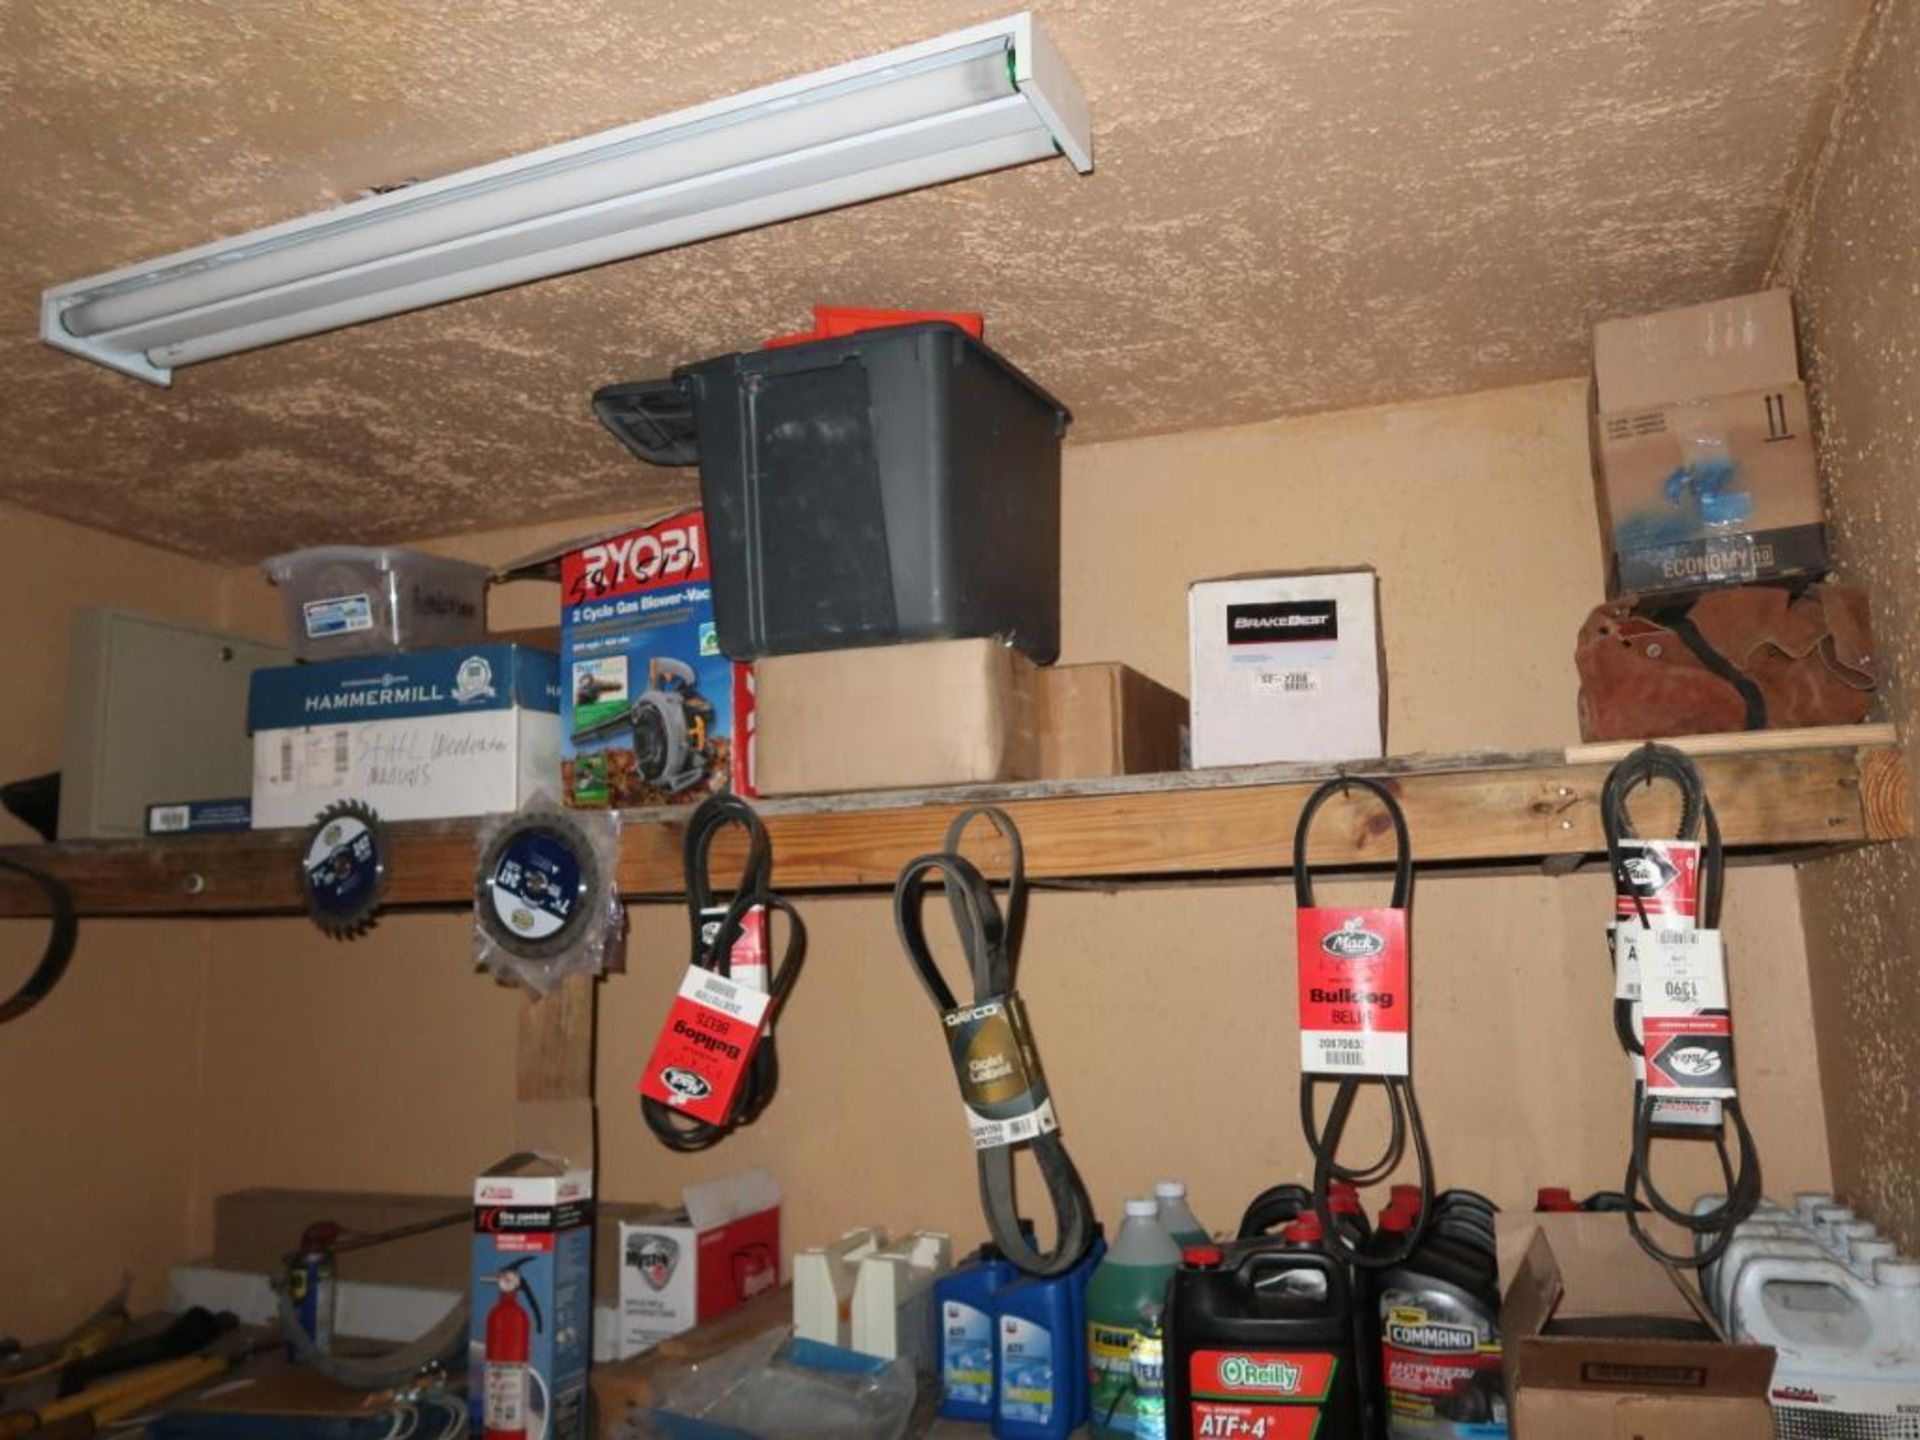 LOT: Contents of Room including Truck & Shop Supplies - Image 2 of 4